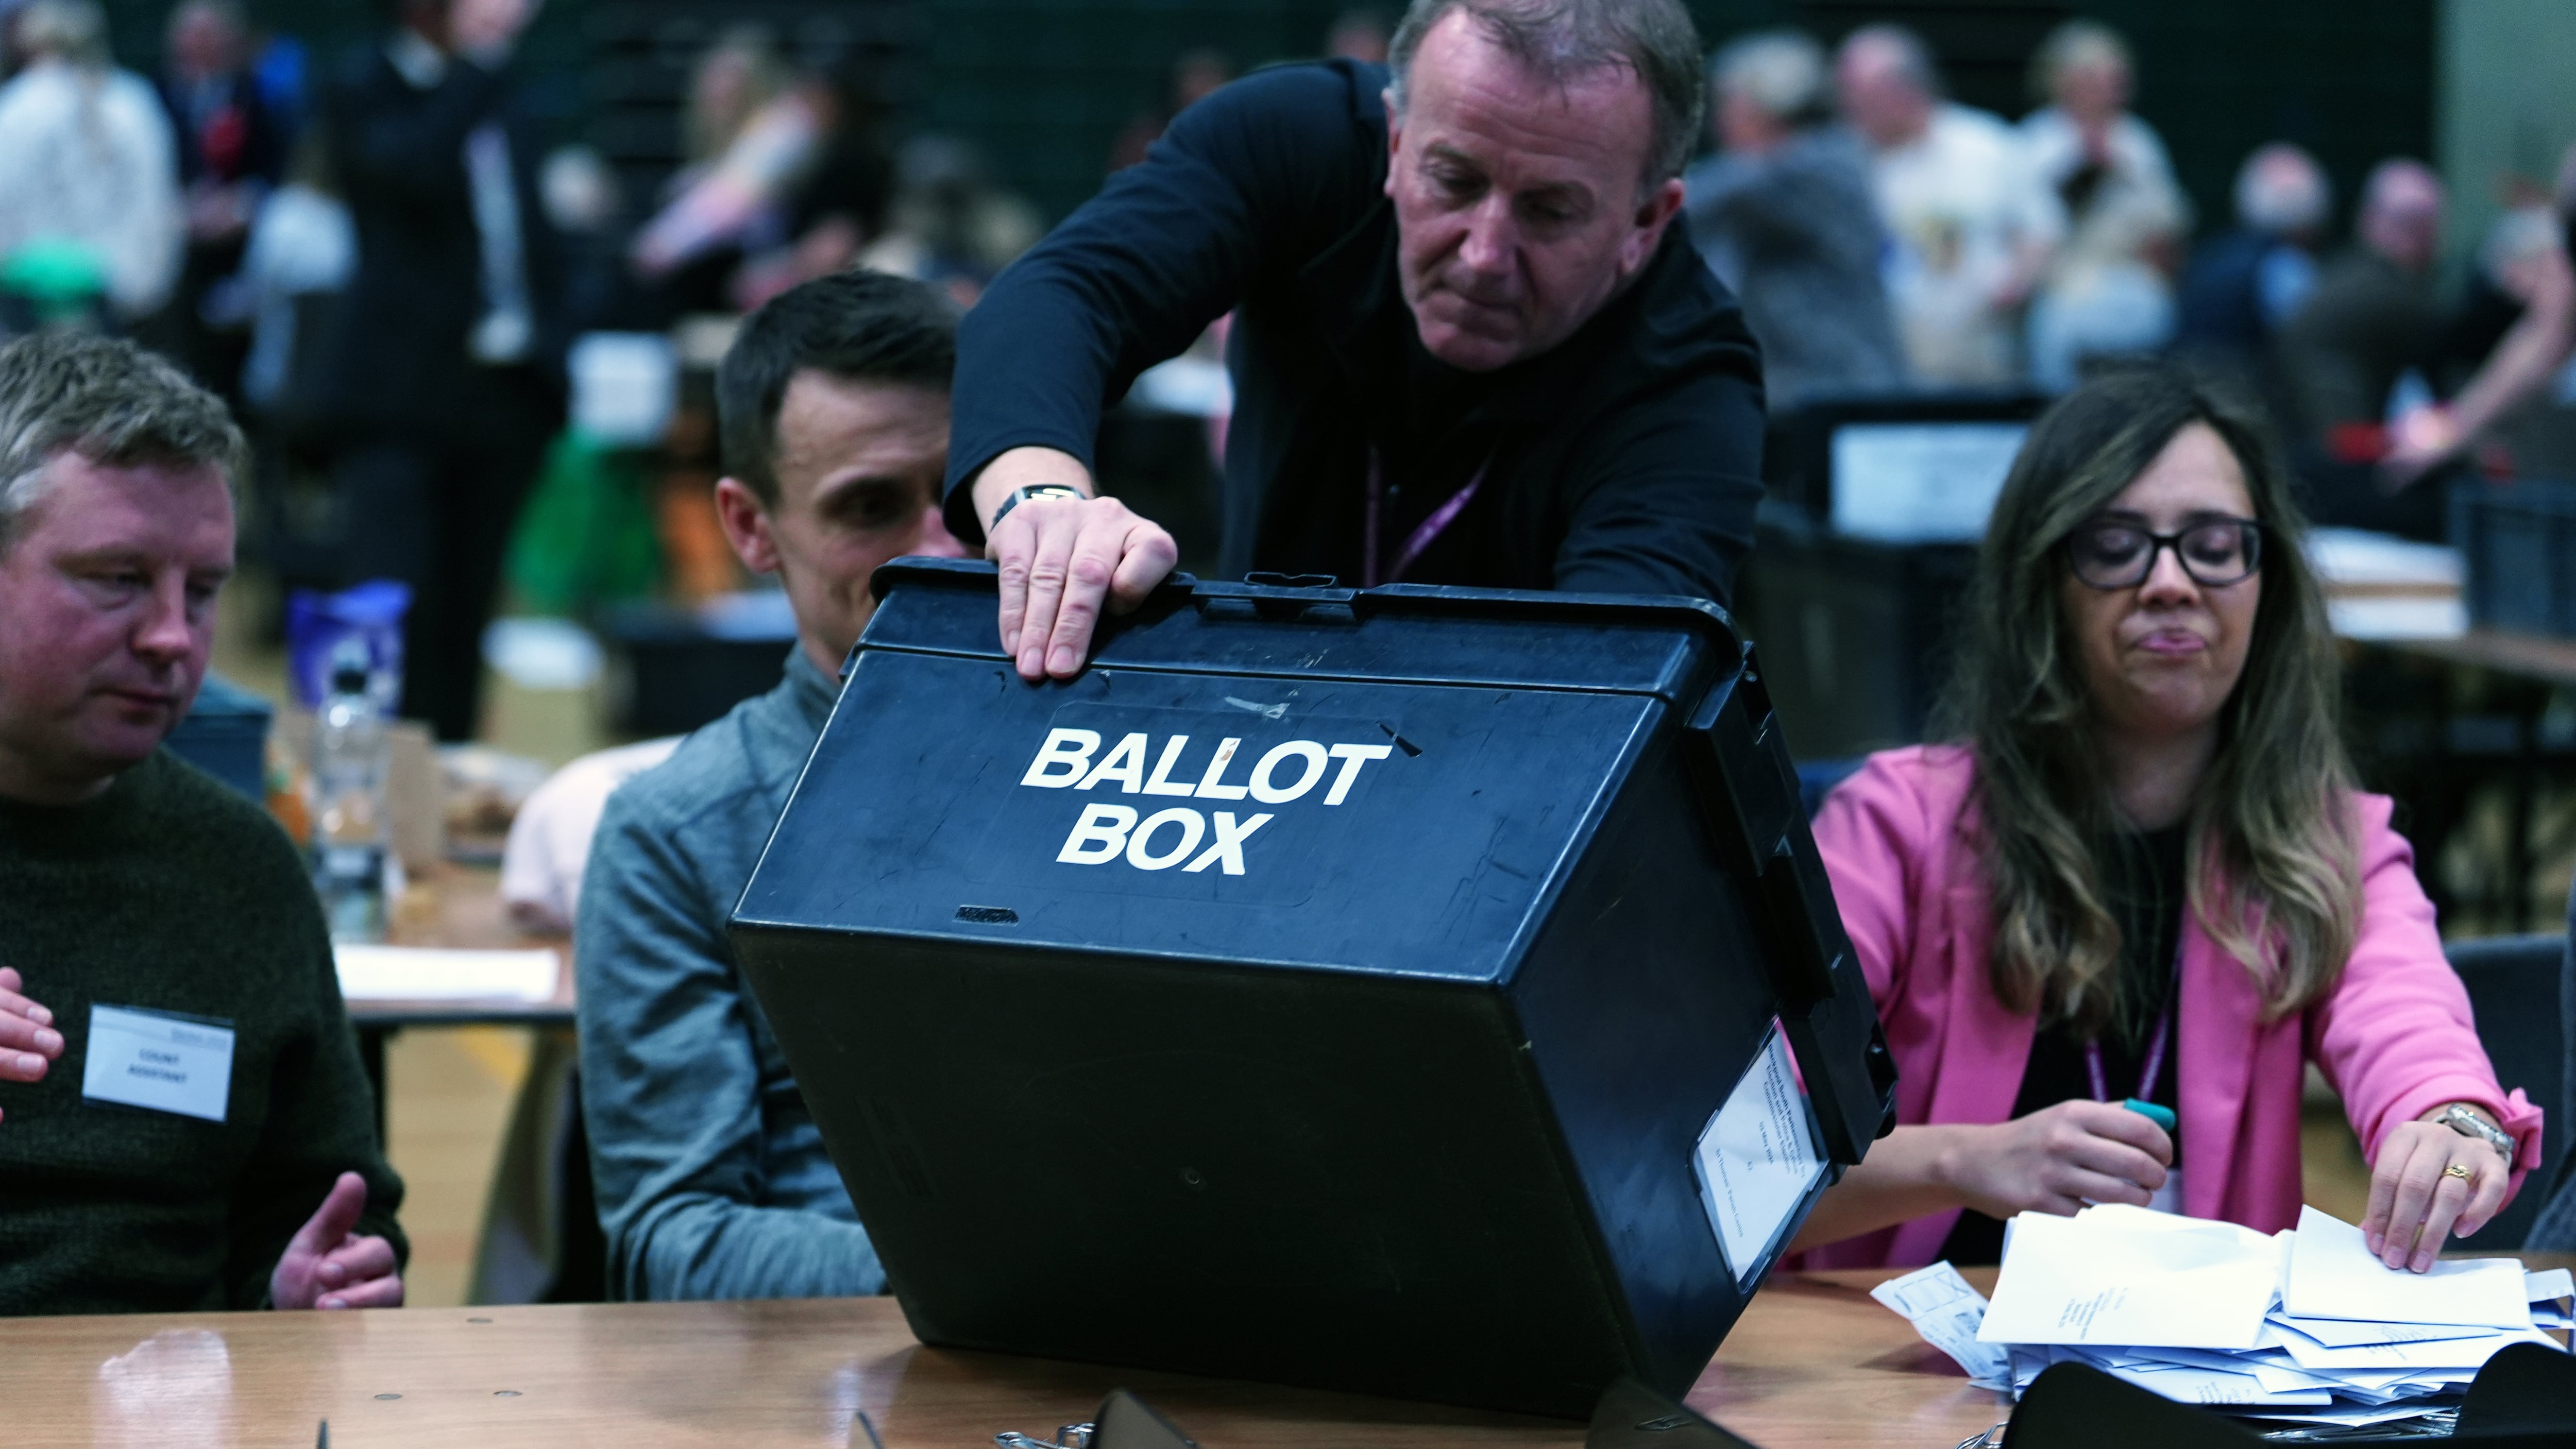 Turnout at every UK general election so far this century has been below 70%